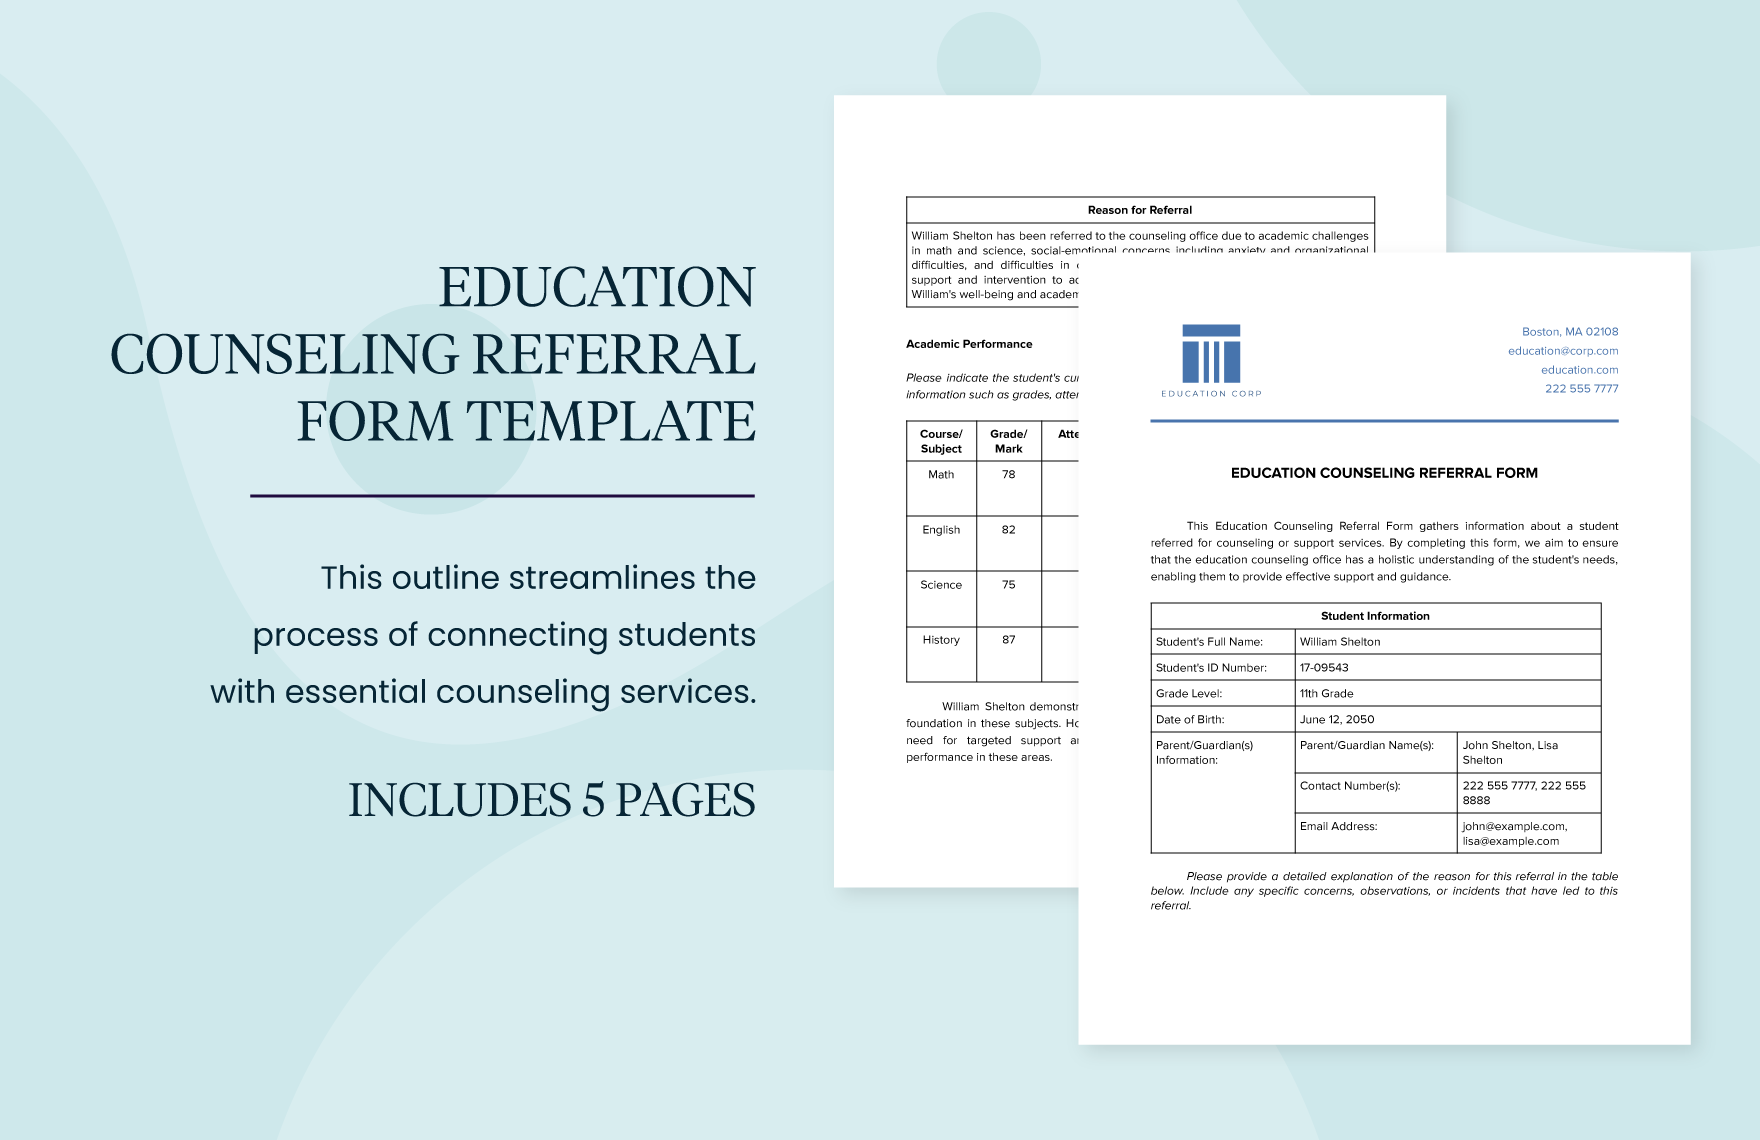 Education Counseling Referral Form Template